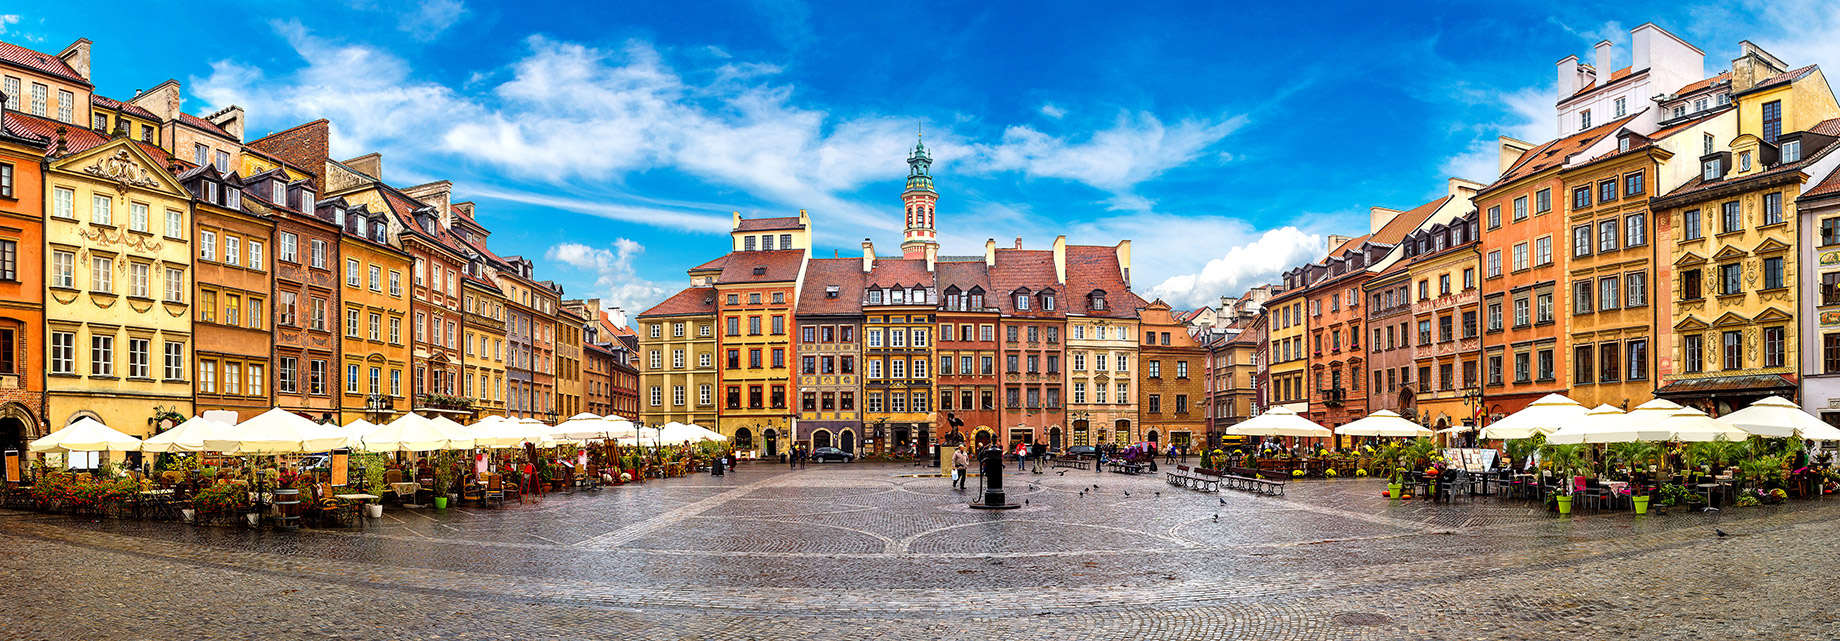 Old Town Square - Warsaw, Poland